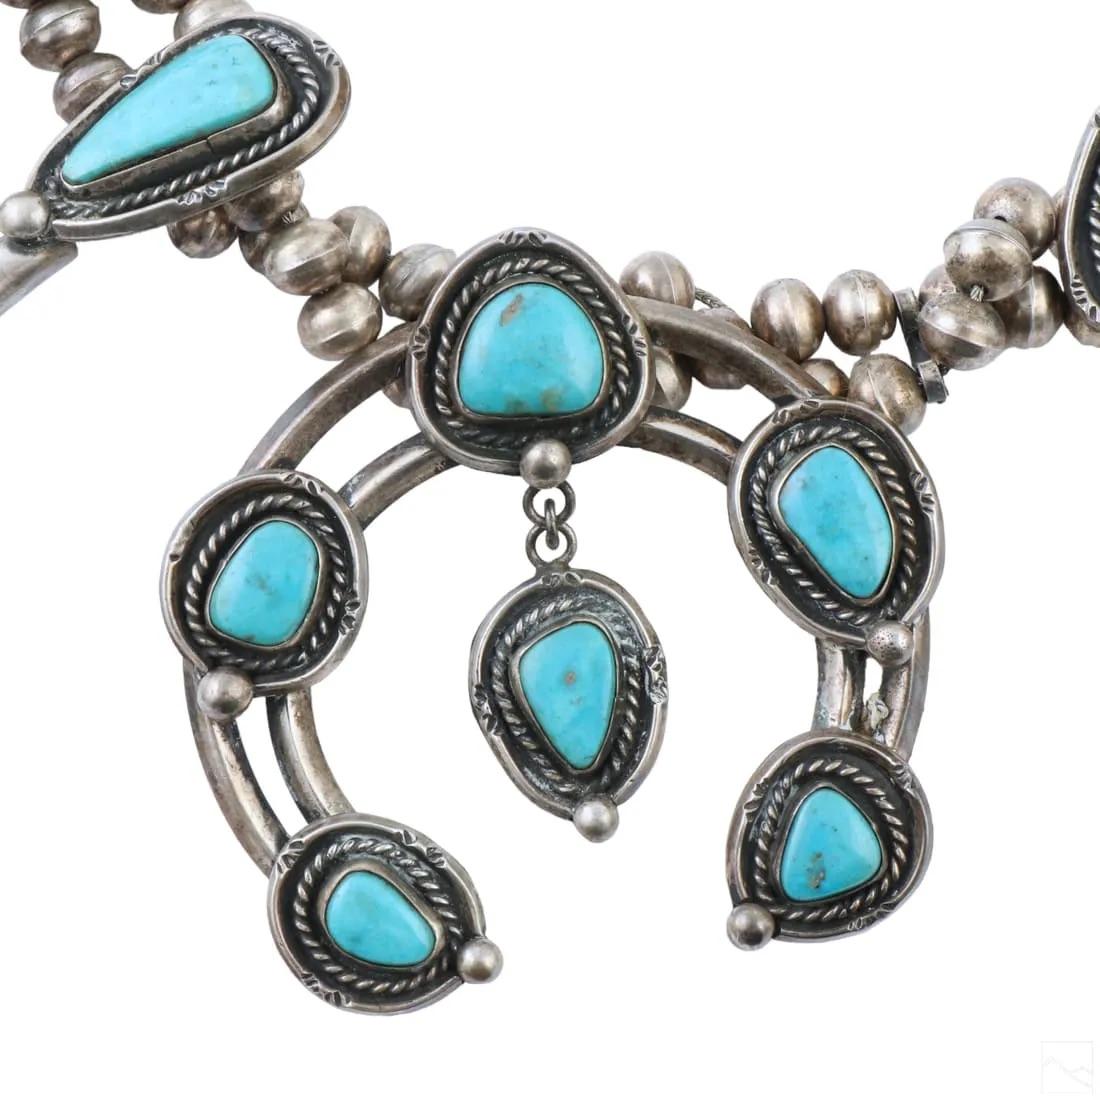 Old pawn vintage Southwest Navajo Indian sterling silver turquoise squash blossom necklace. No apparent makers mark. Features bench beads, with hook closure, 11 turquoise set squashes, measuring approximately 1